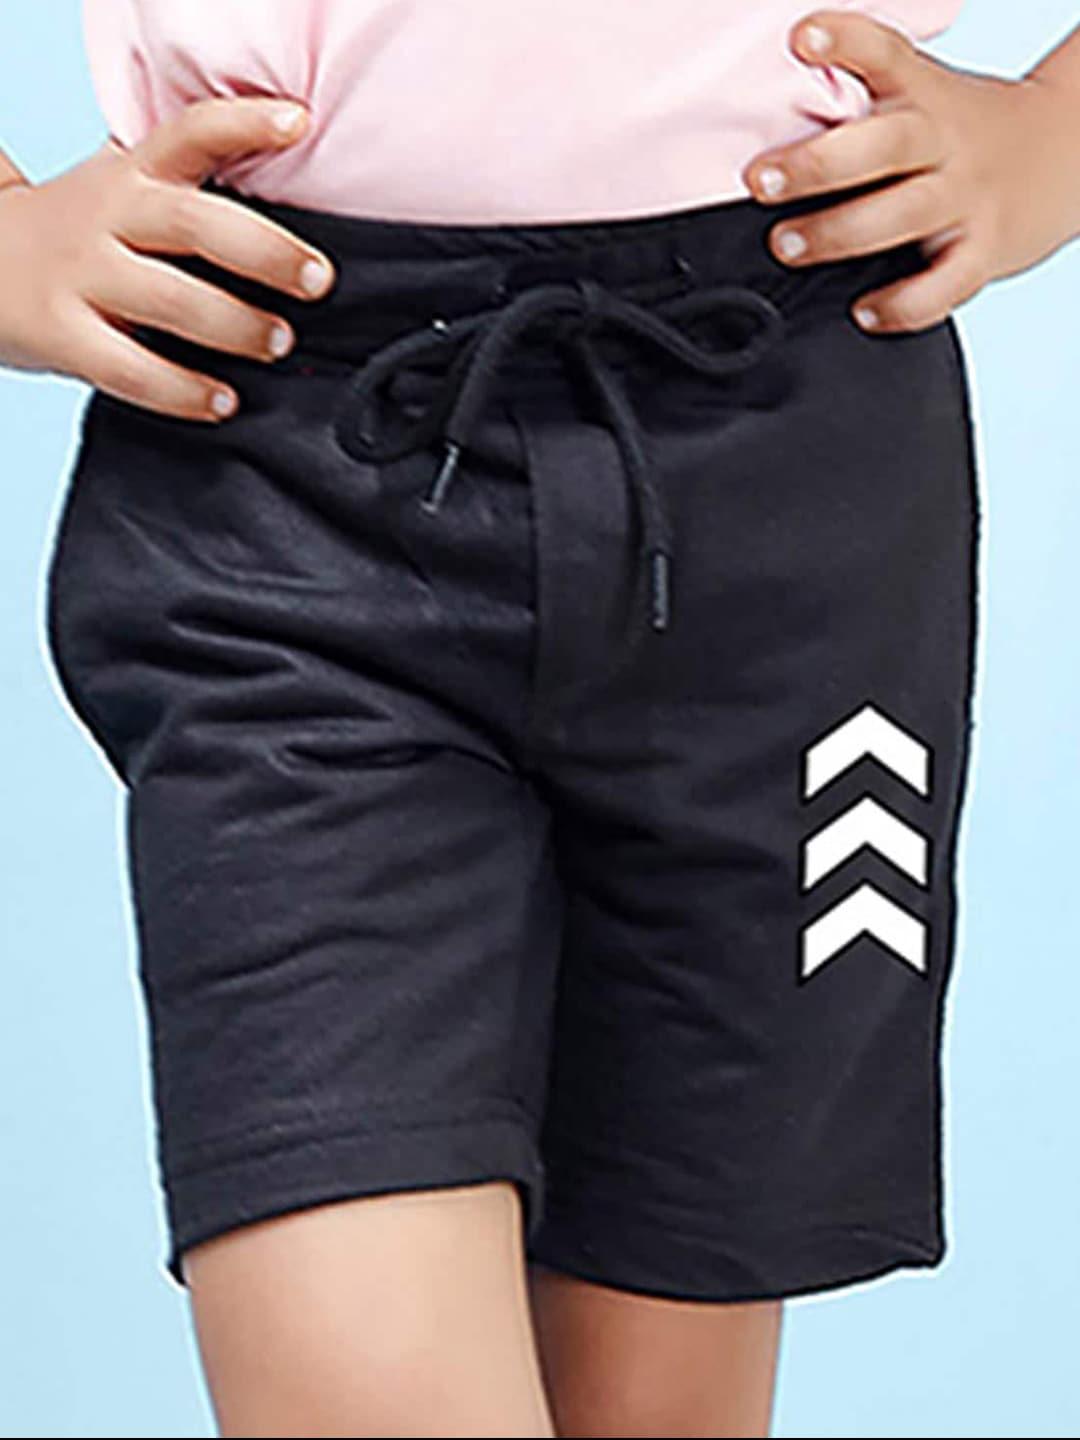 nusyl-boys-graphic-printed-mid-rise-shorts